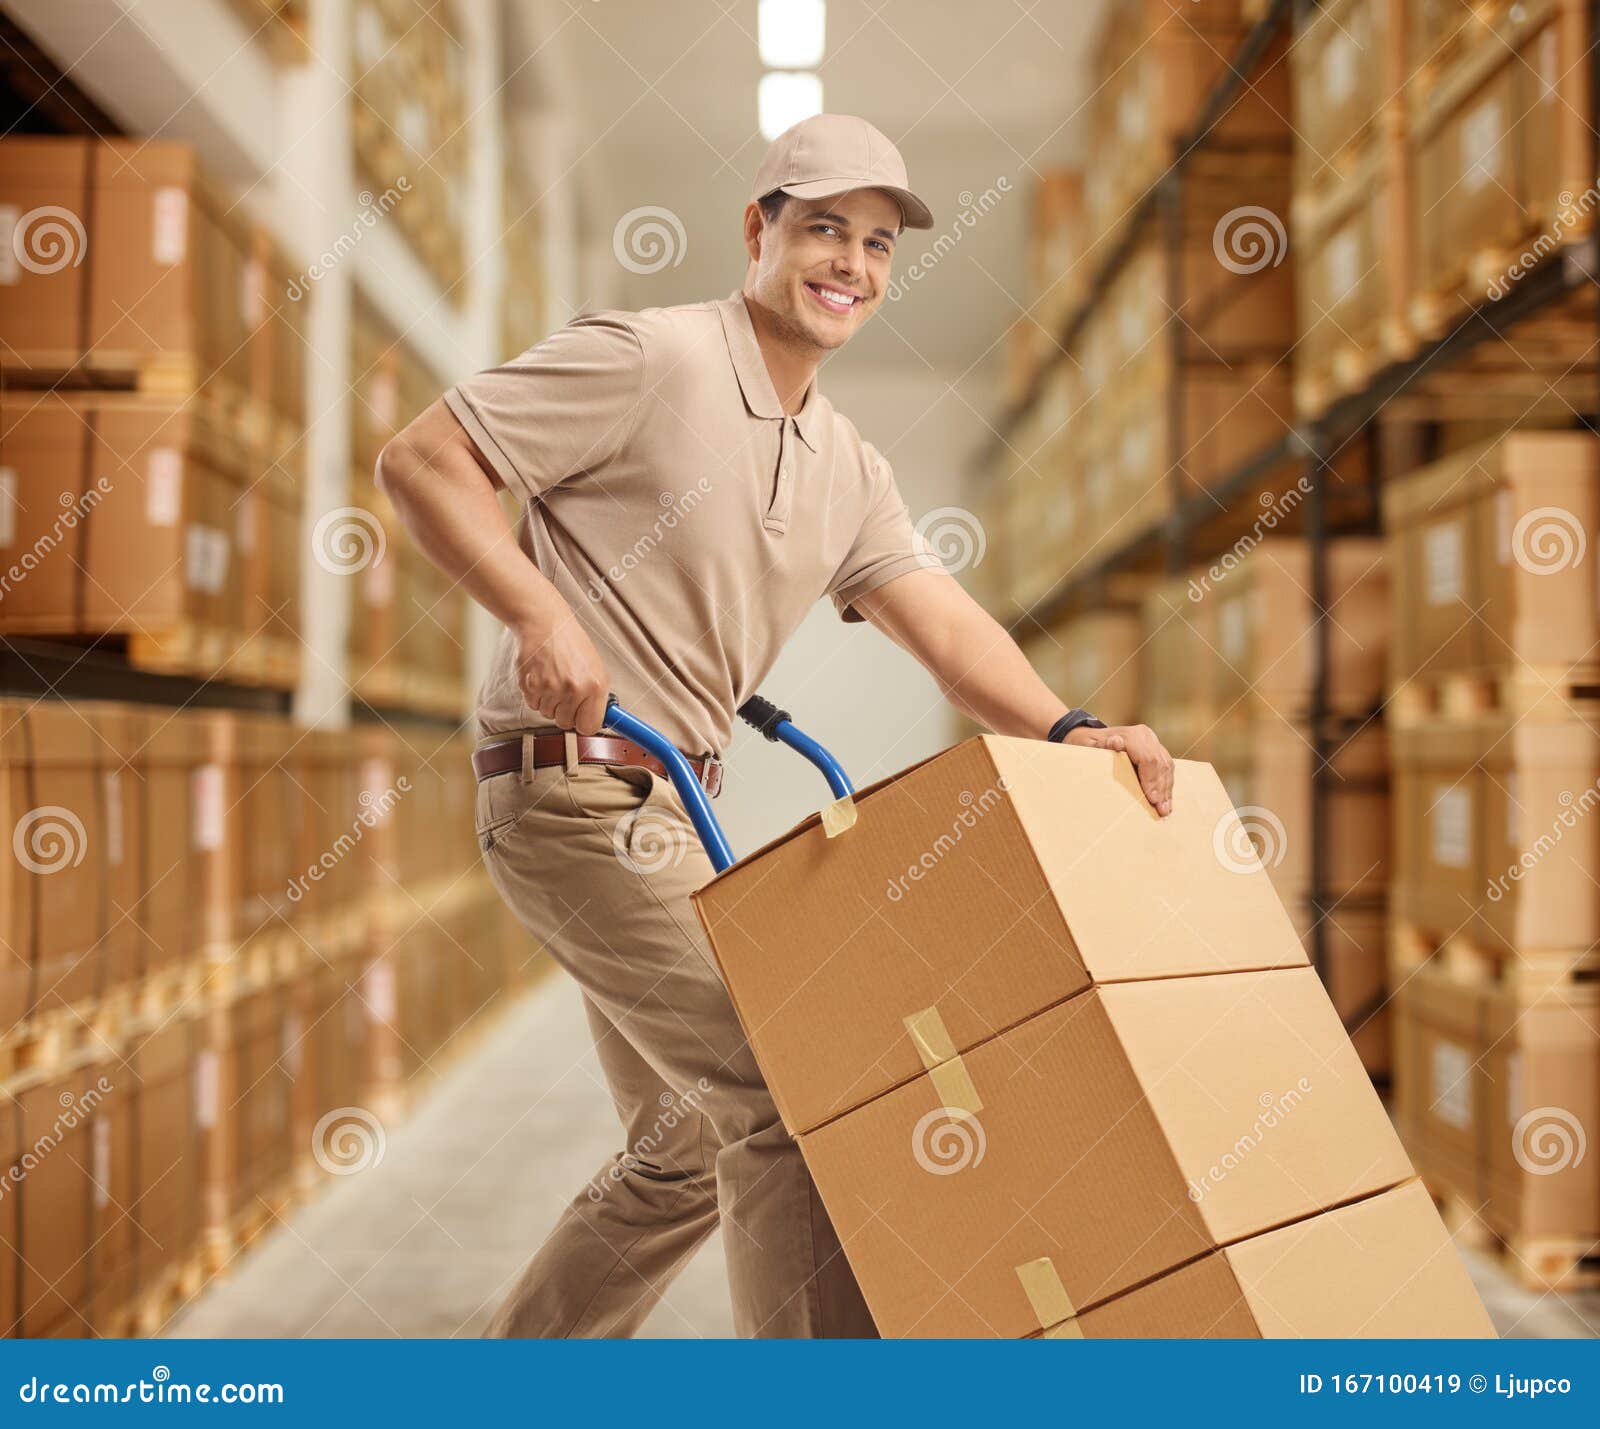 Delivery Man With A Hand Truck Loaded Boxes Stock Image Of.